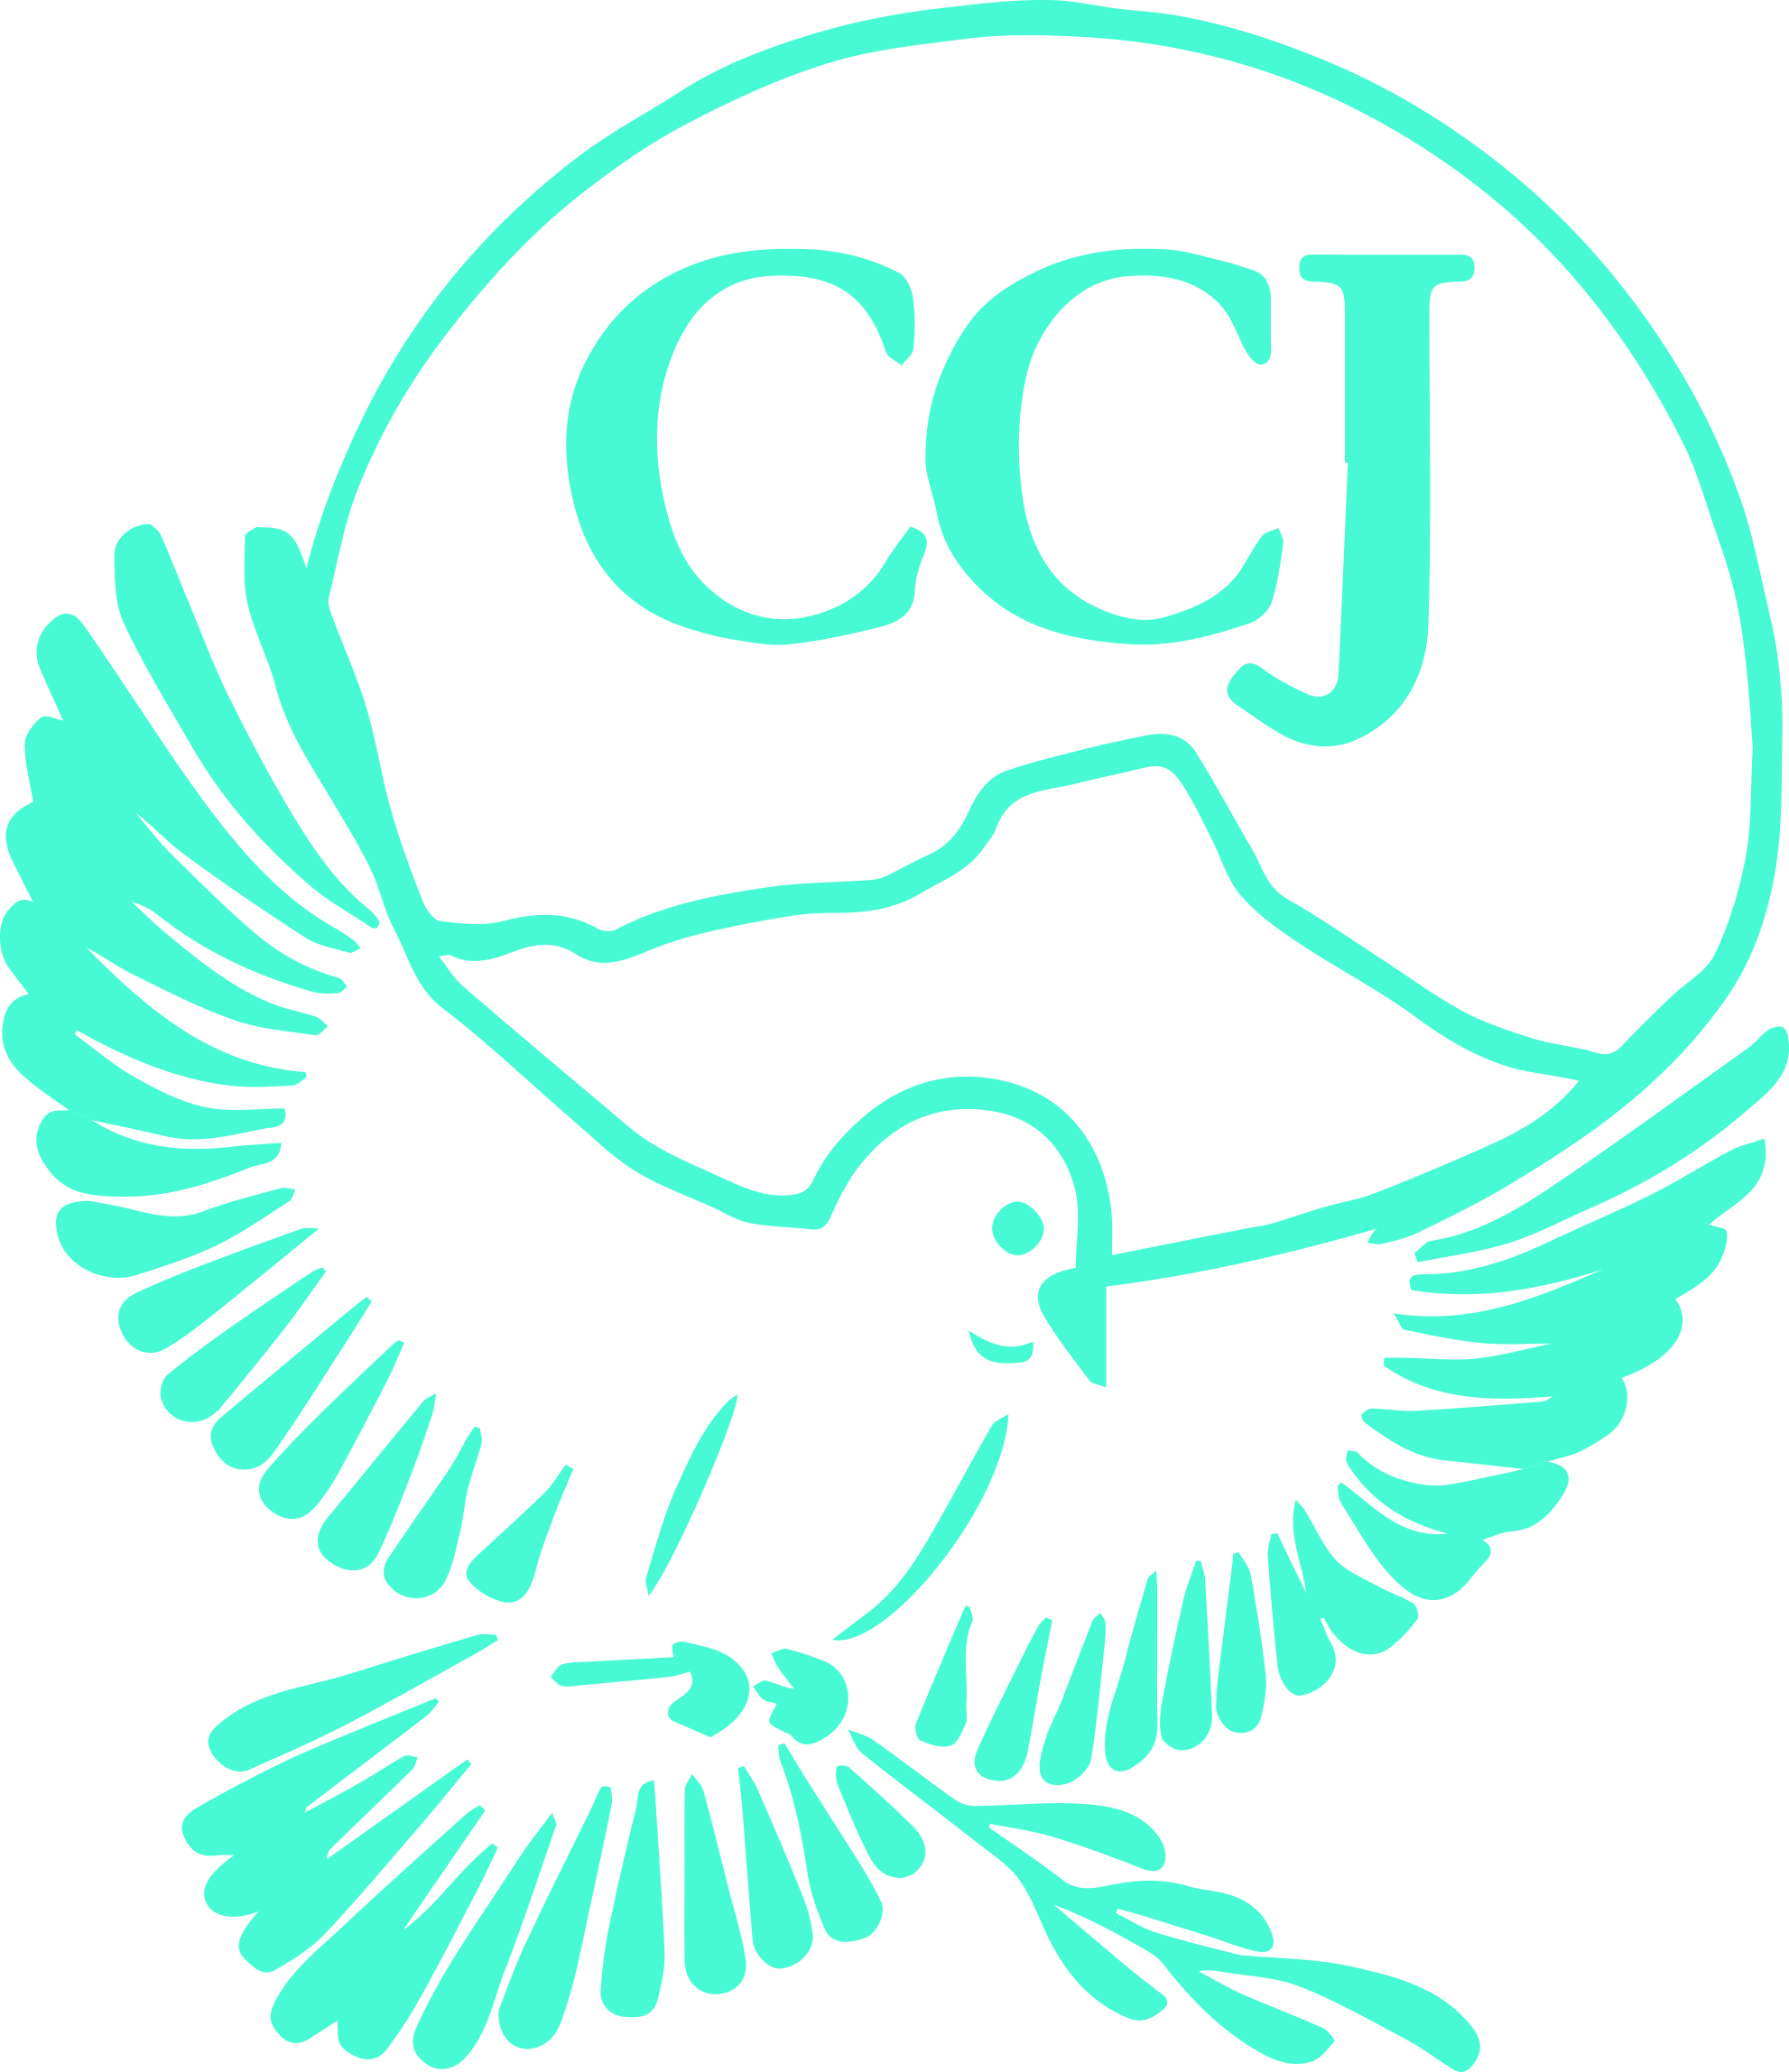 The ccj logo with a dove on it.